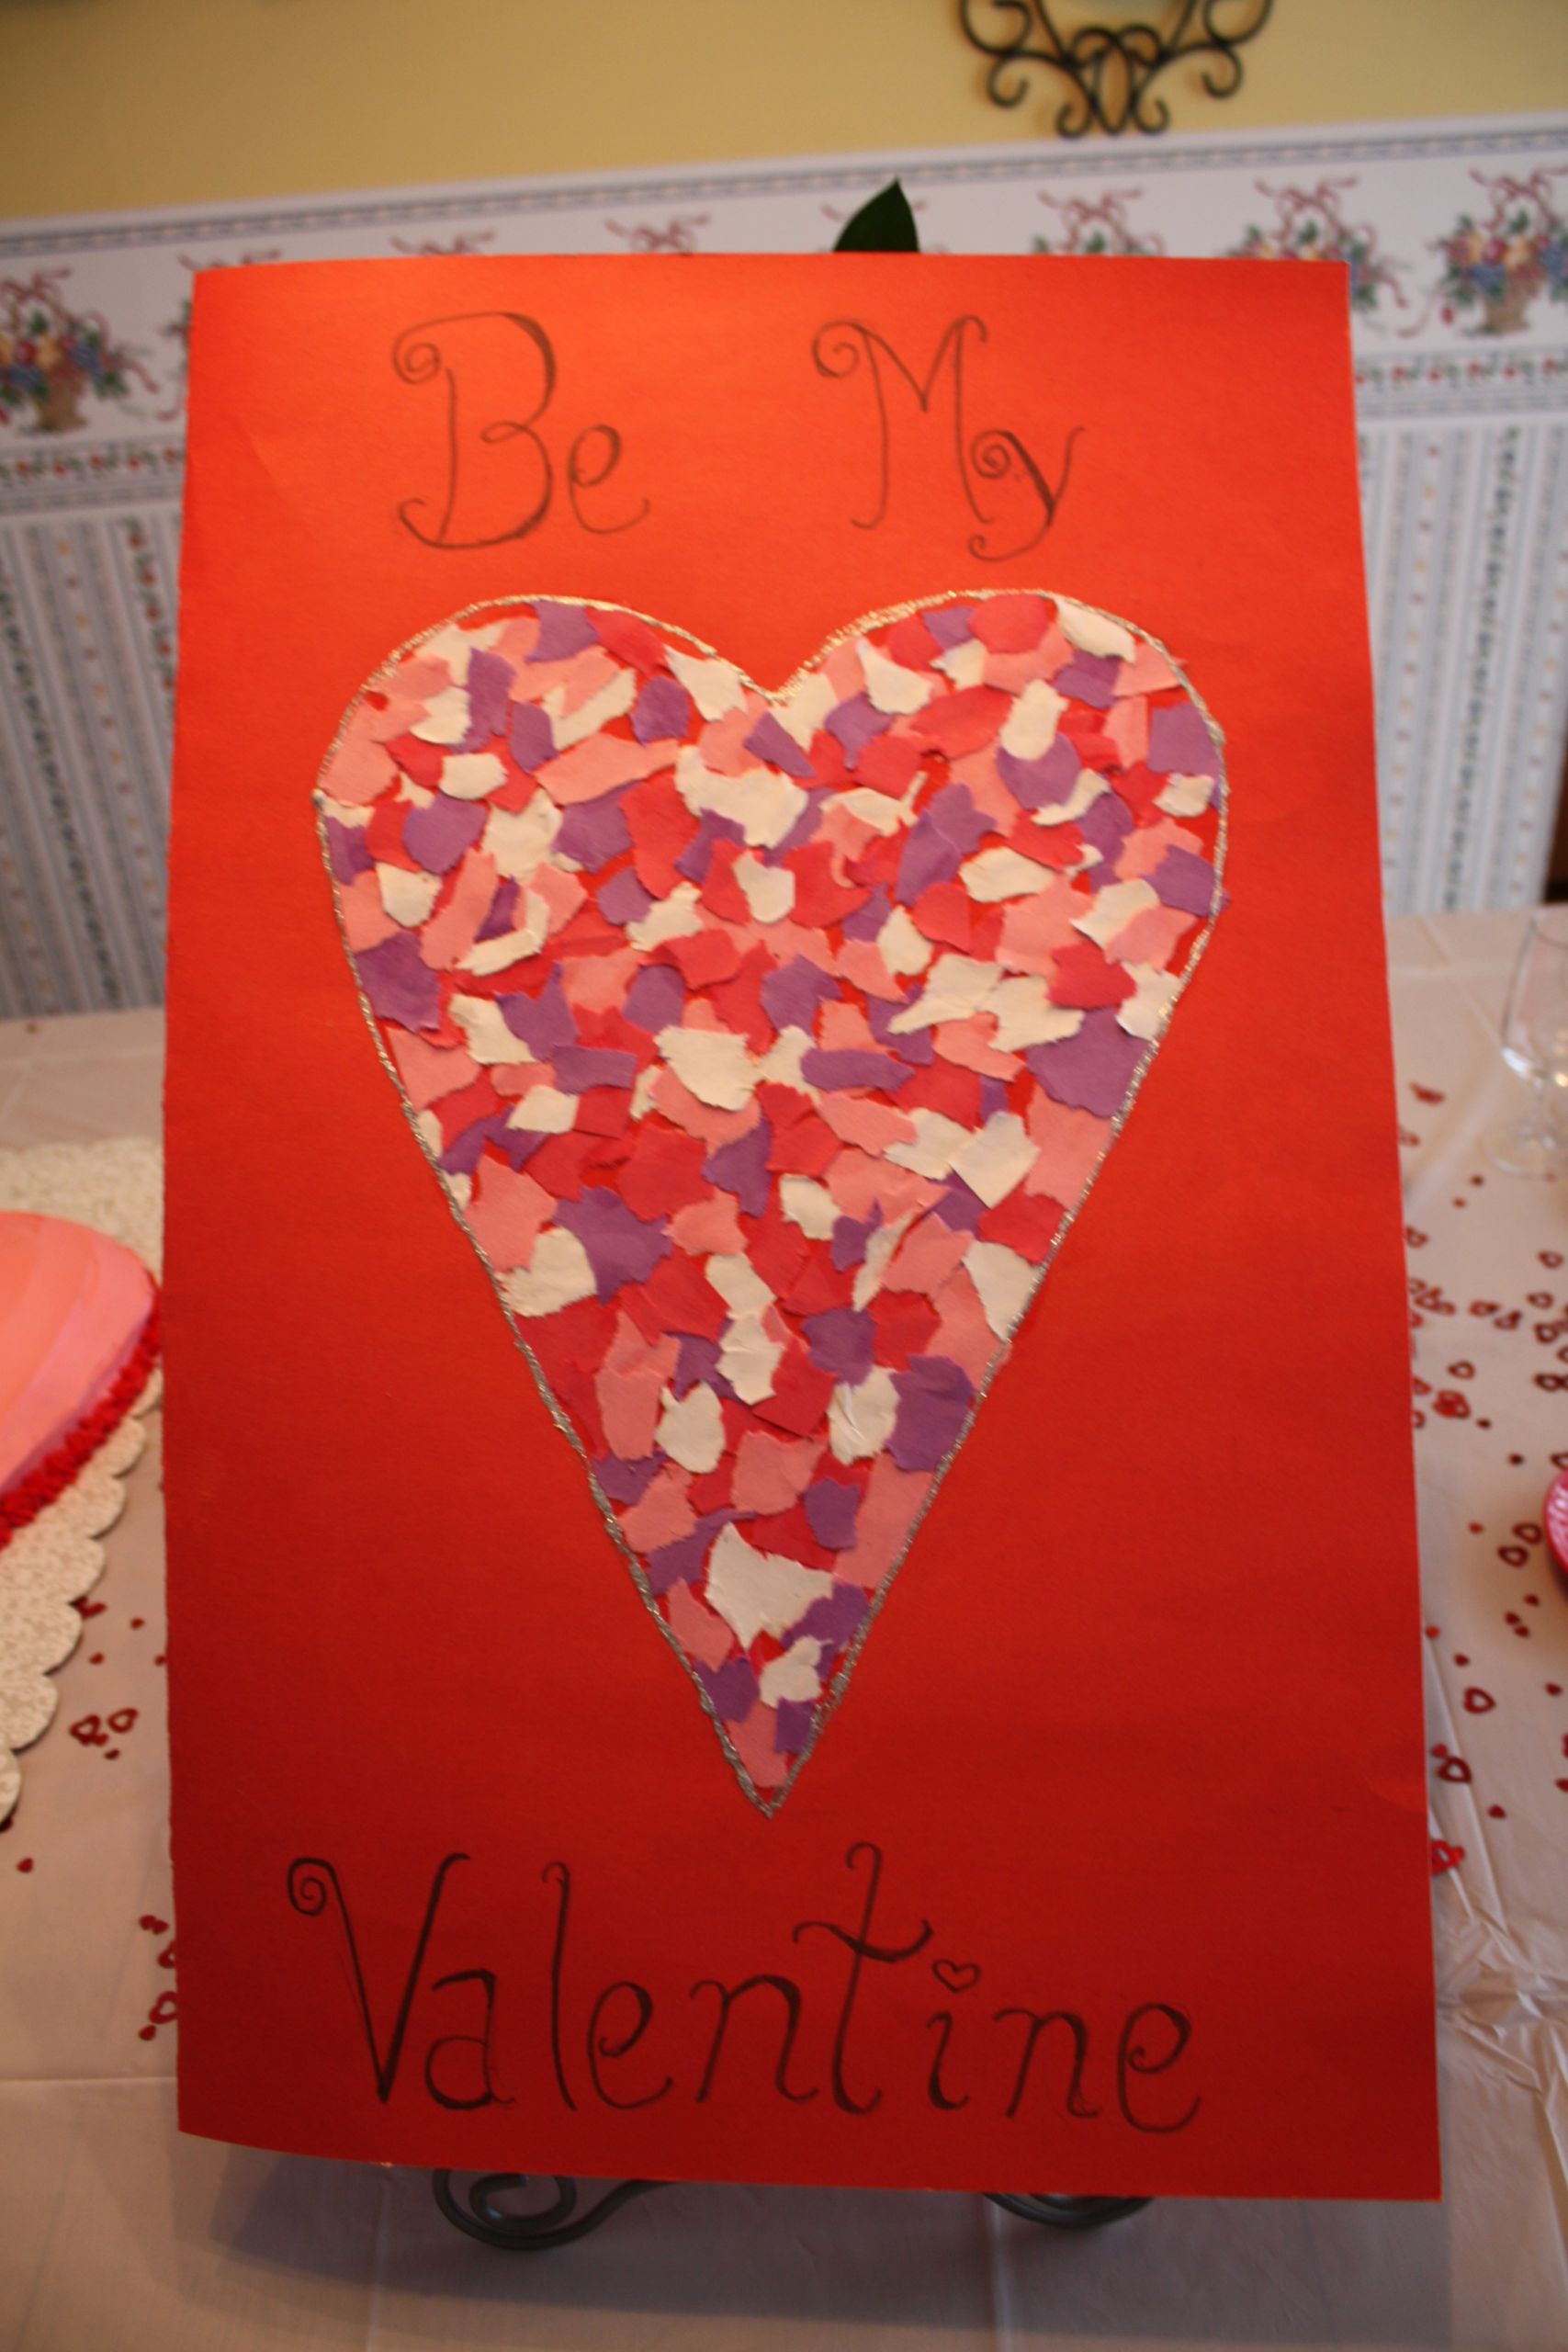 Valentines Day Cards Ideas For Him
 80 Diy Valentine Day Card Ideas – The WoW Style